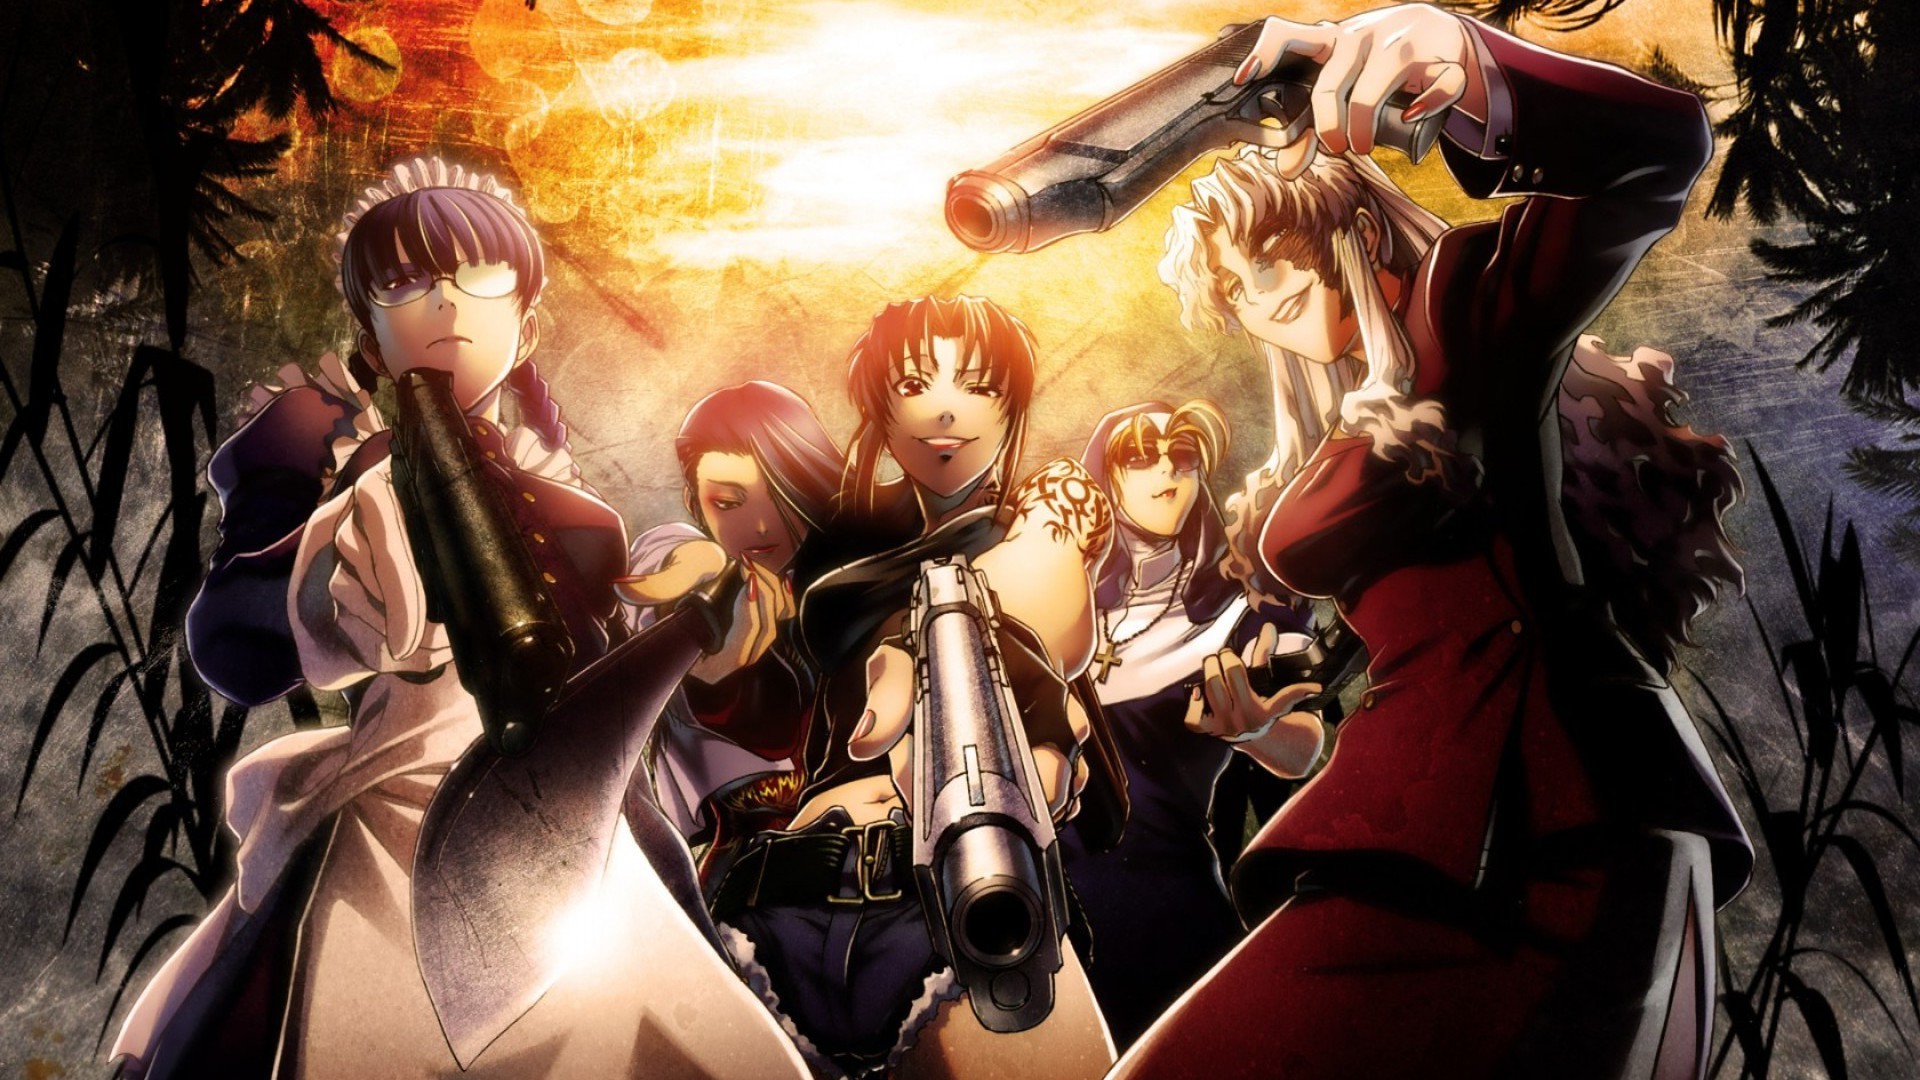 Amazing Black Lagoon Pictures & Backgrounds